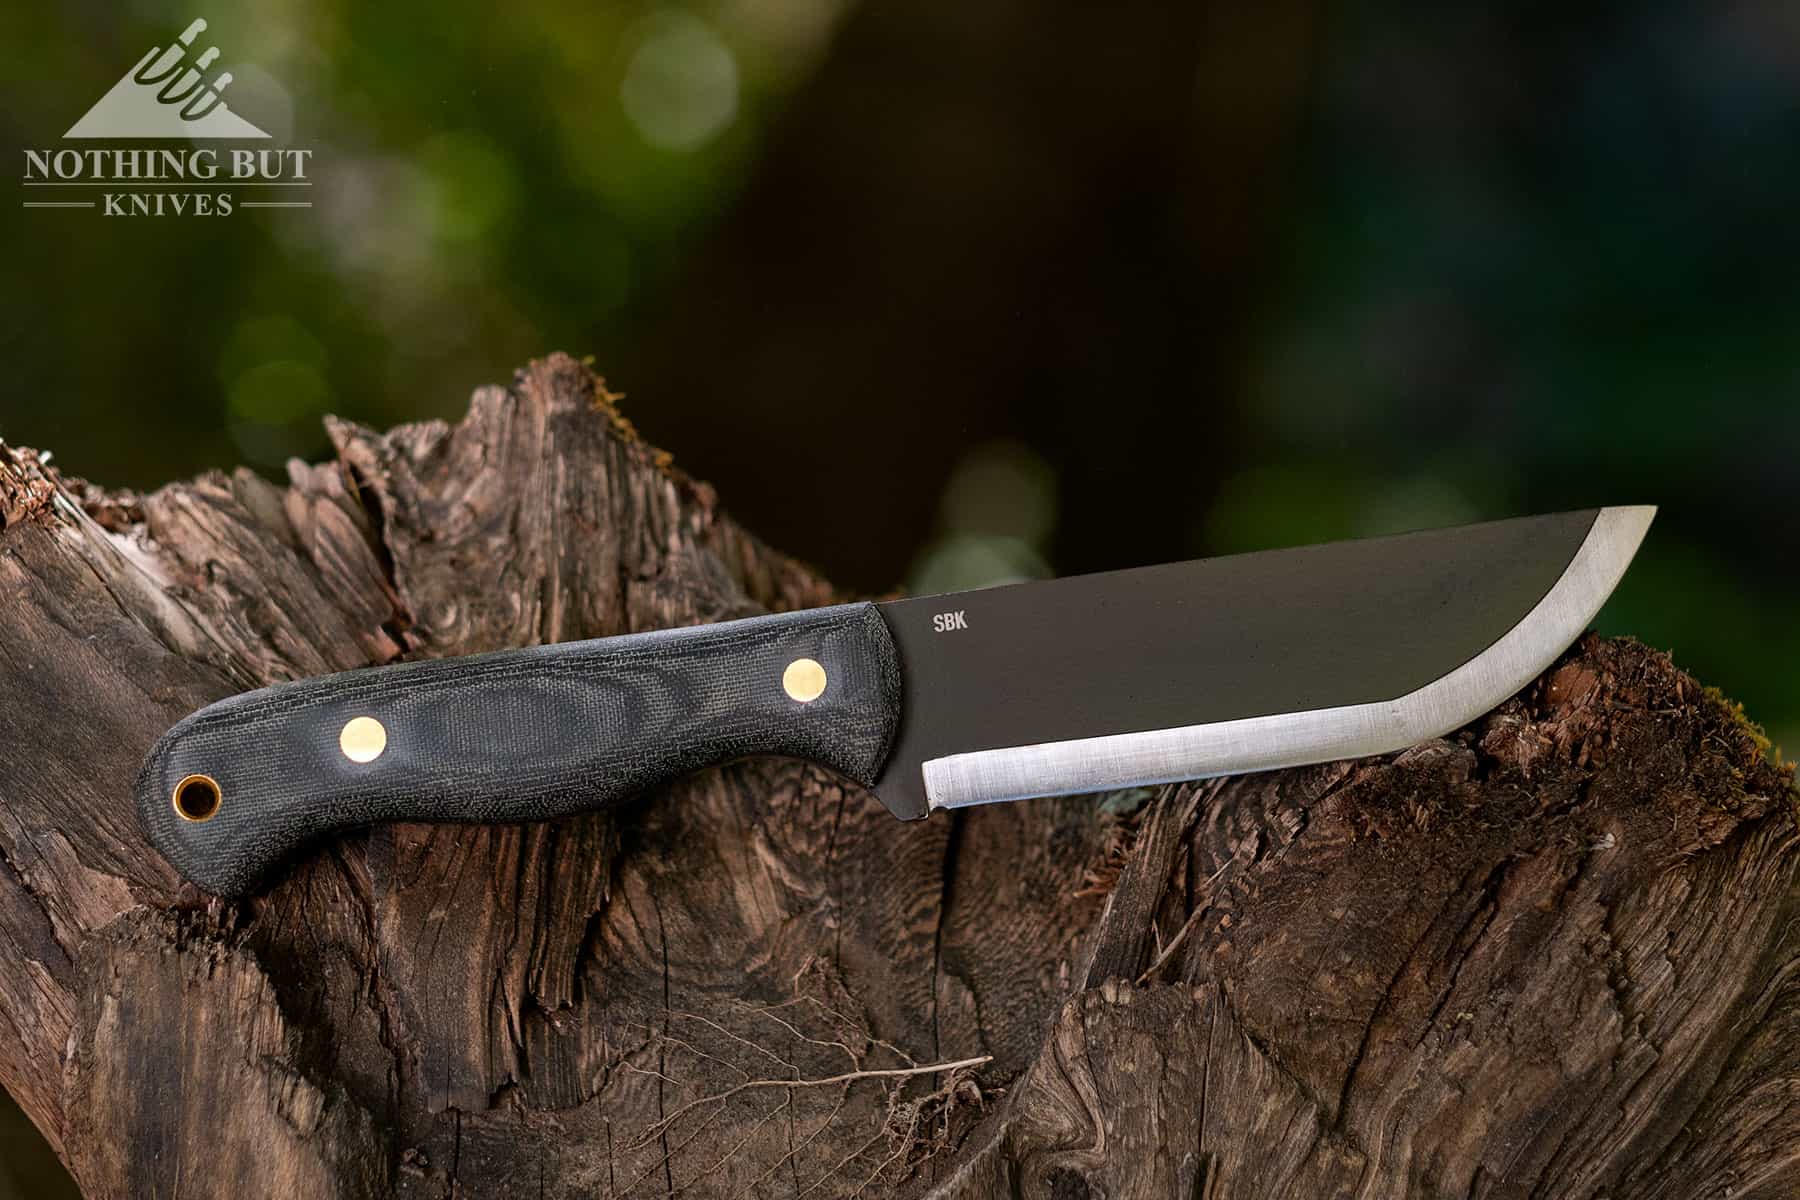 The Condor SBK, shown here, is a possible bushcraft alternative to the Off-Grid Ridgeback.